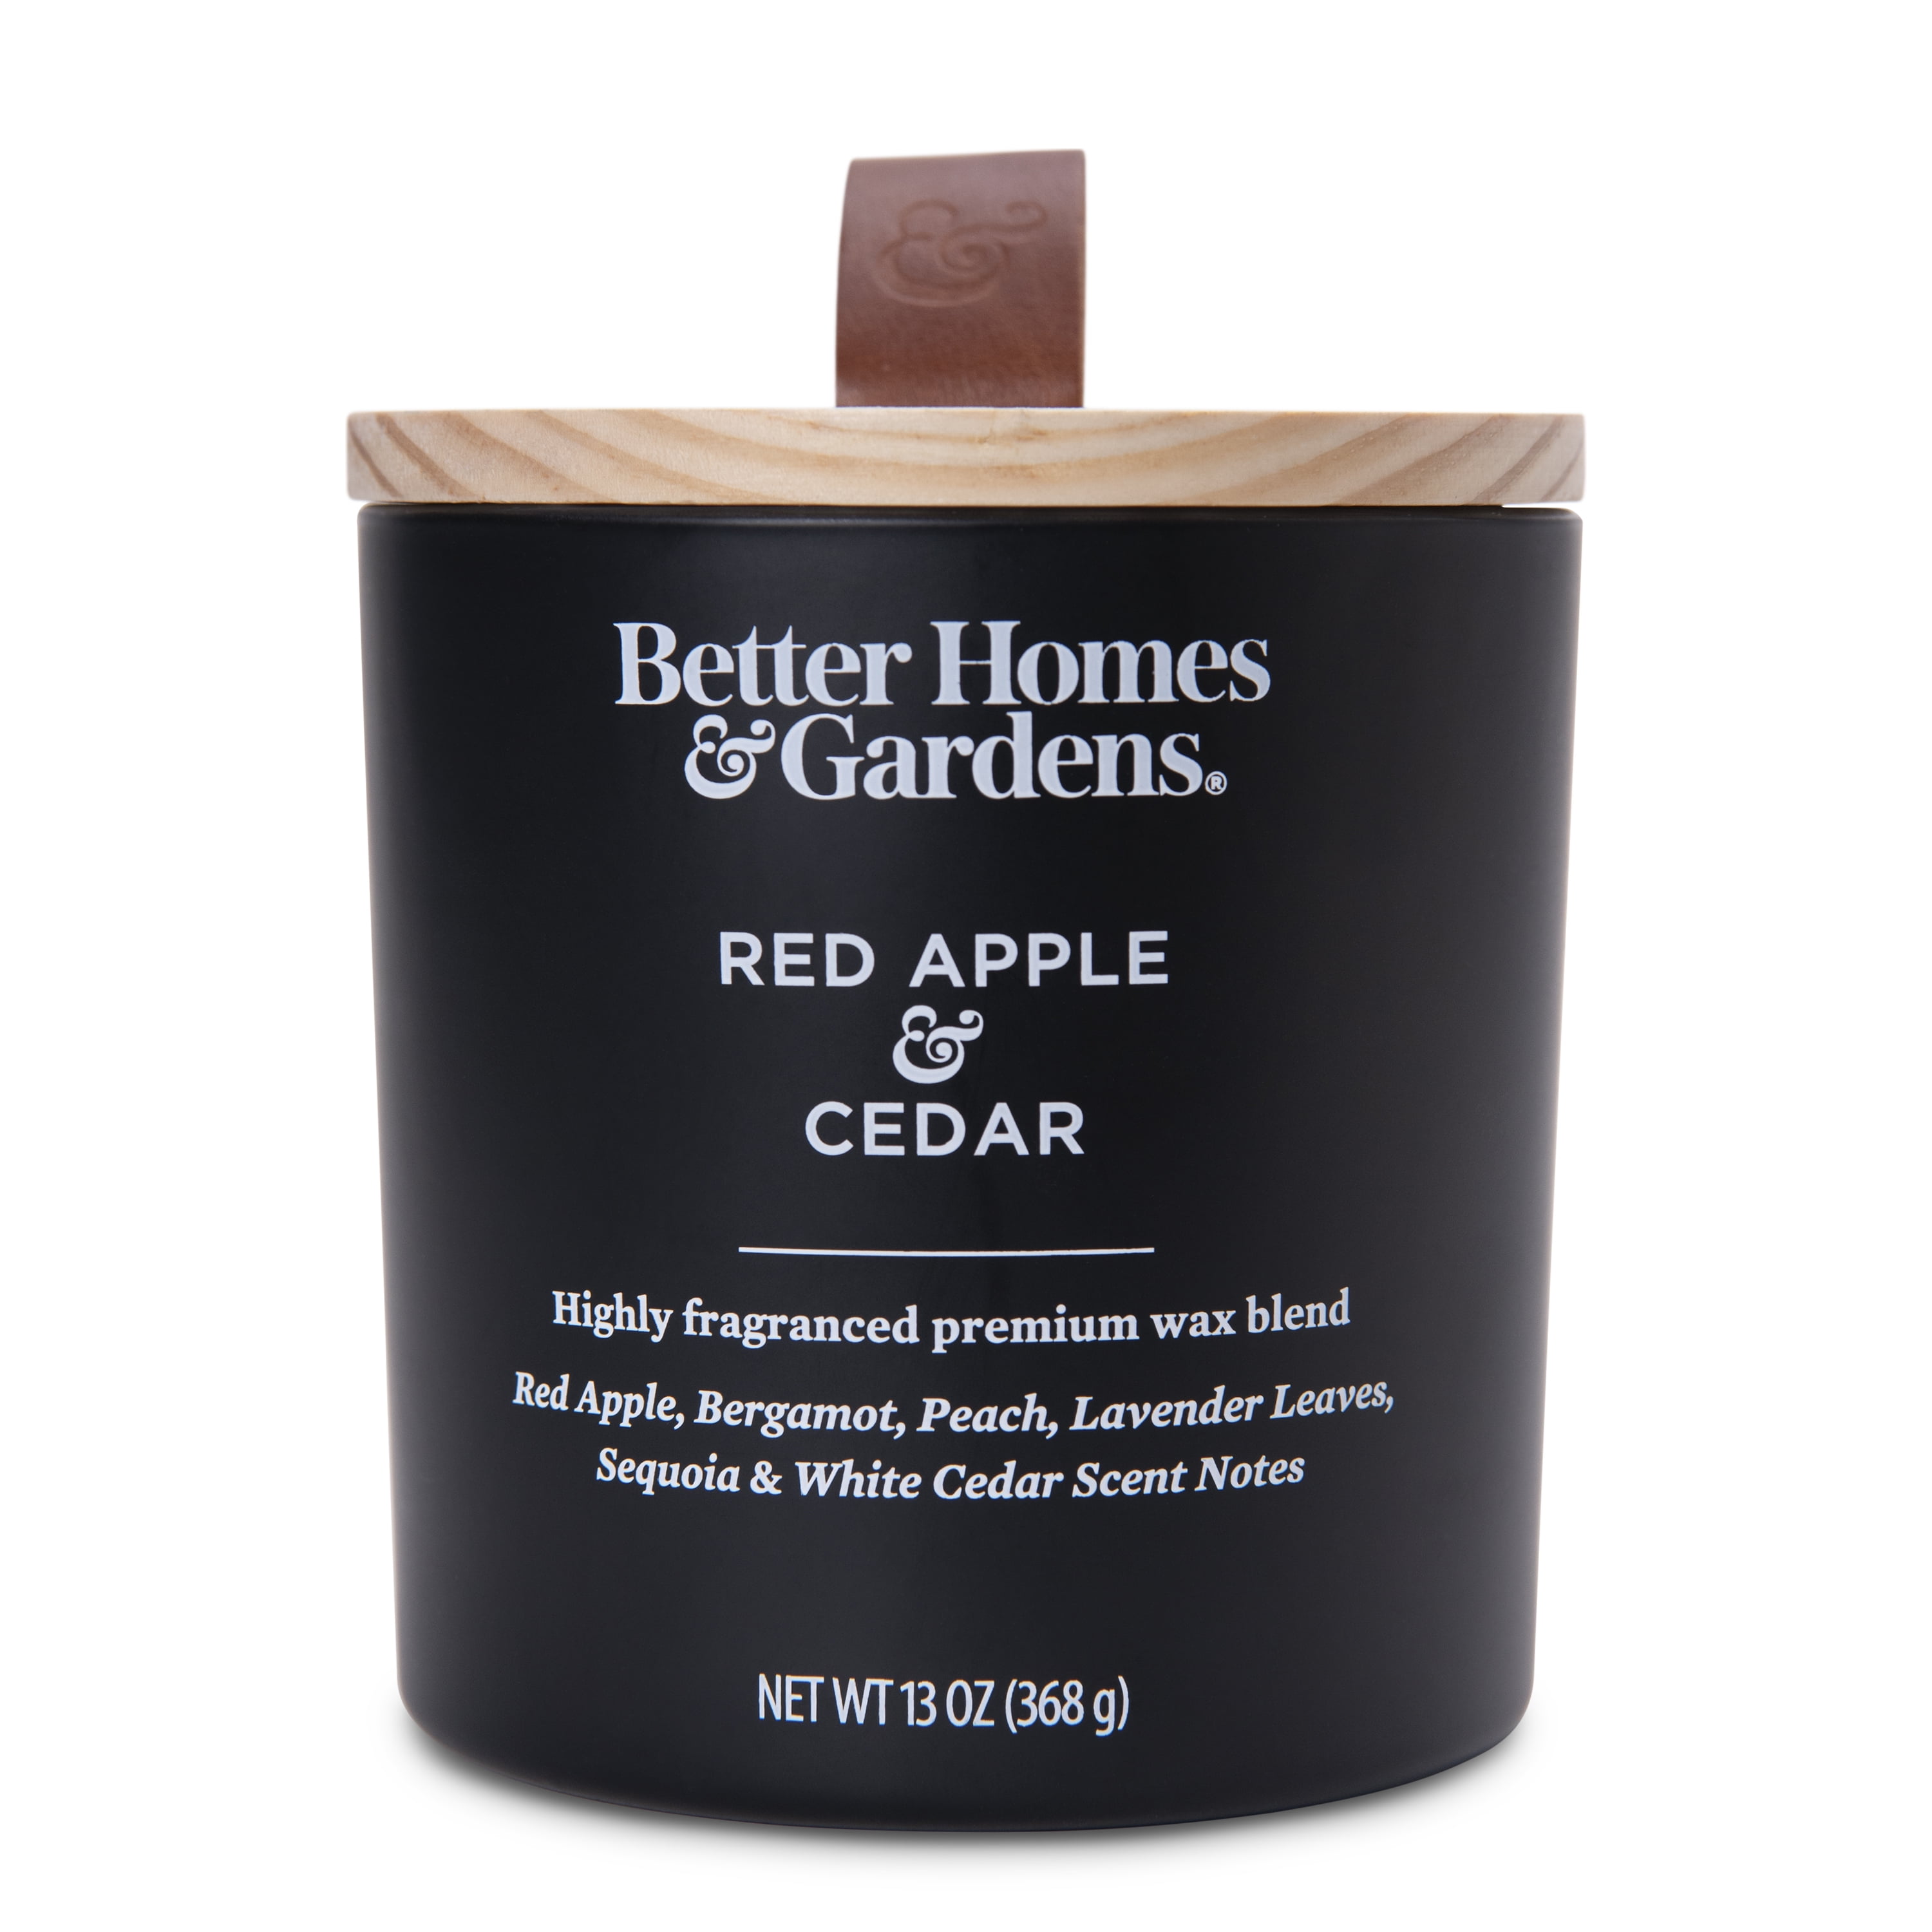 Better Homes & Gardens 13oz Red Apple & Cedar Scented Wooden Wick Jar Candle